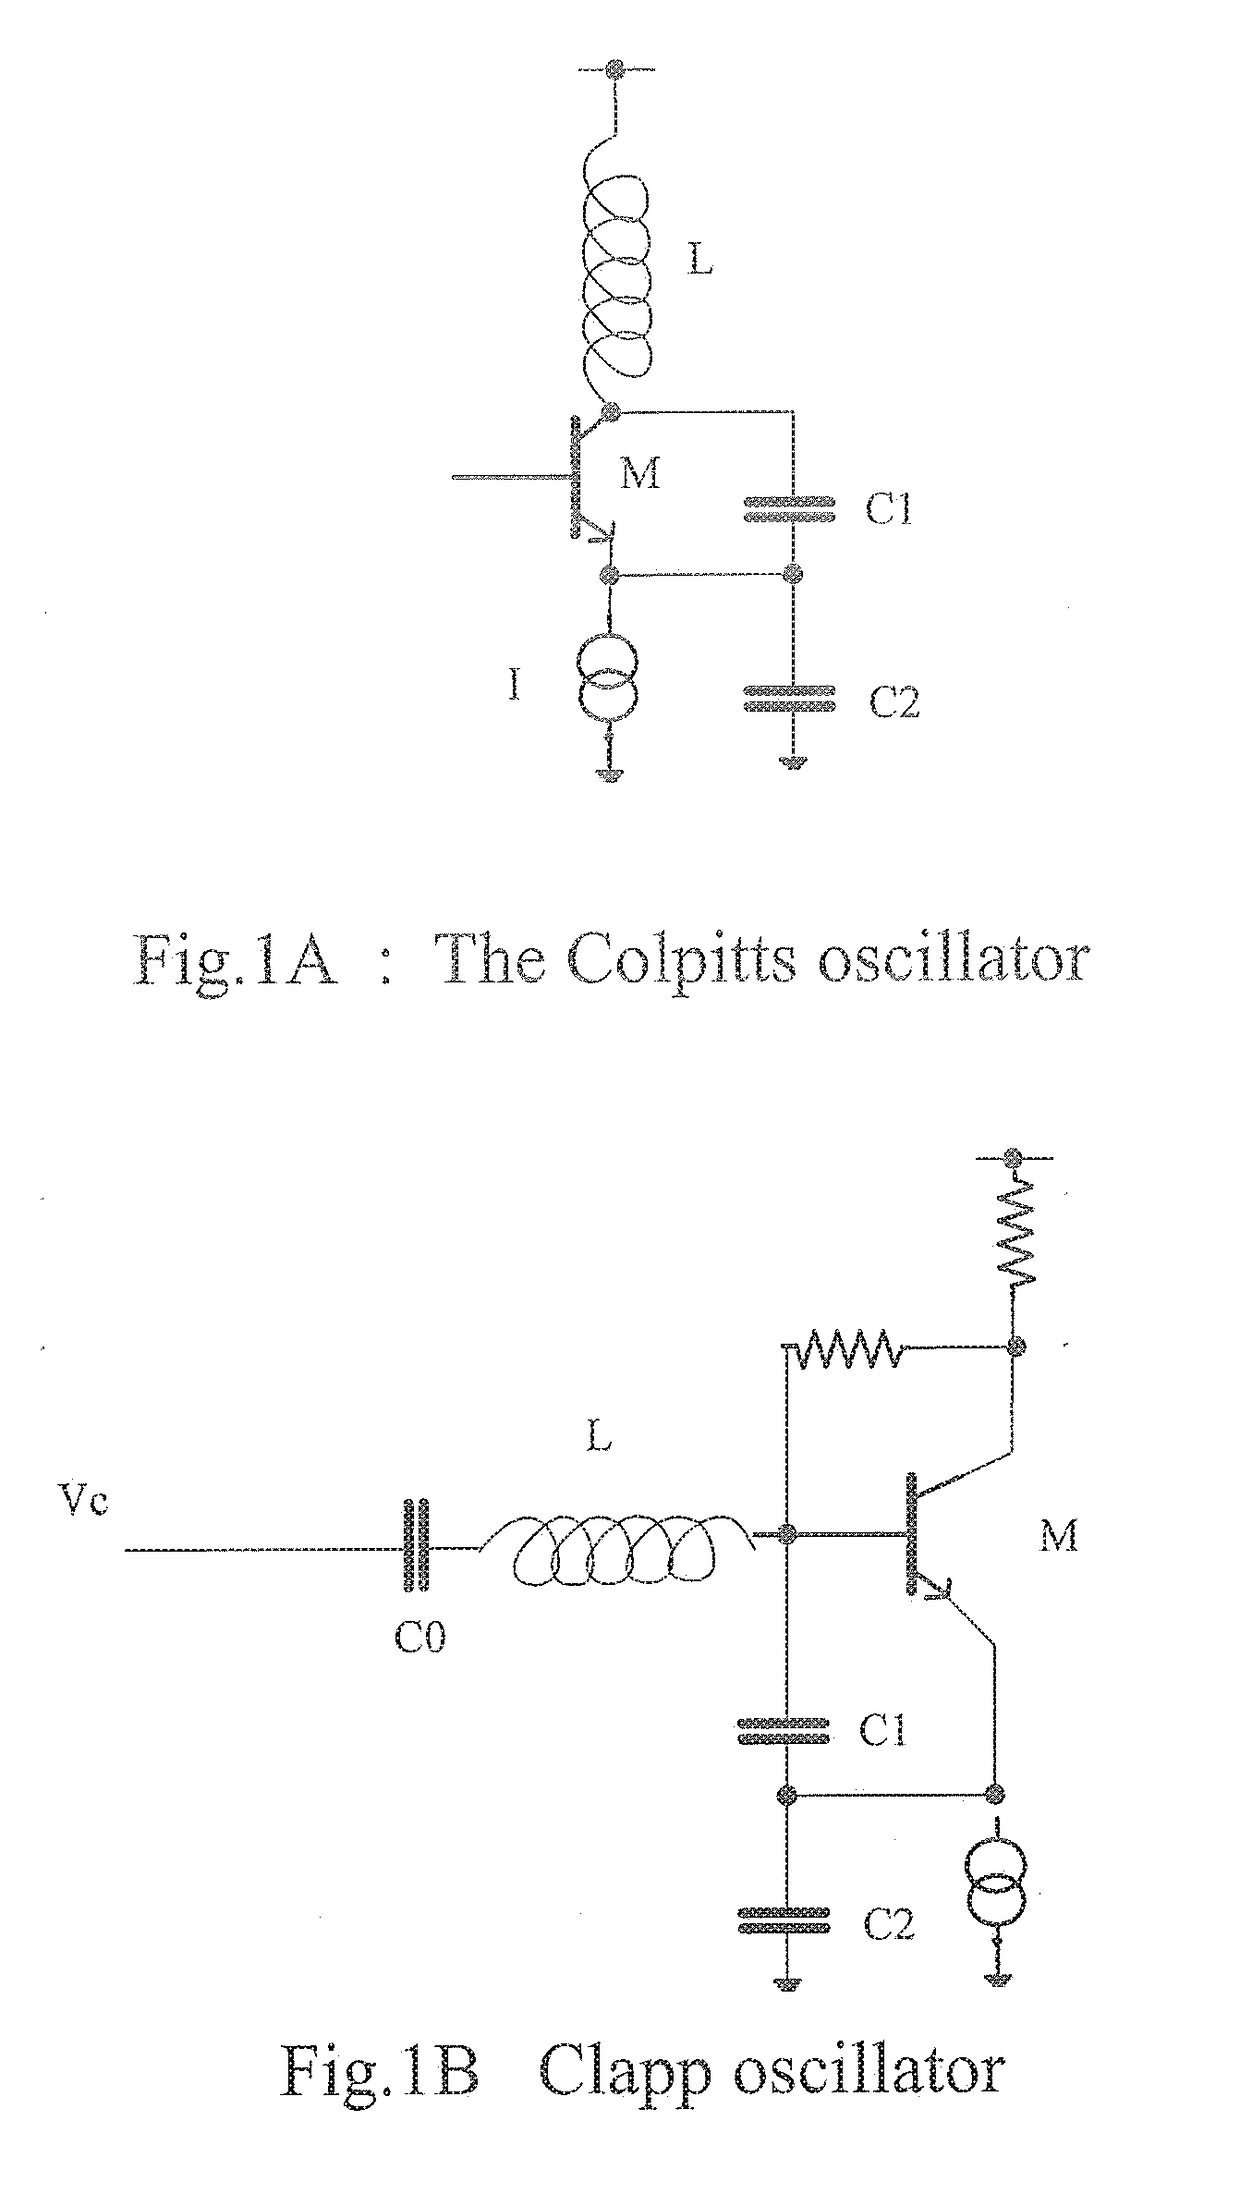 Variable frequency oscillator having wide tuning range and low phase noise